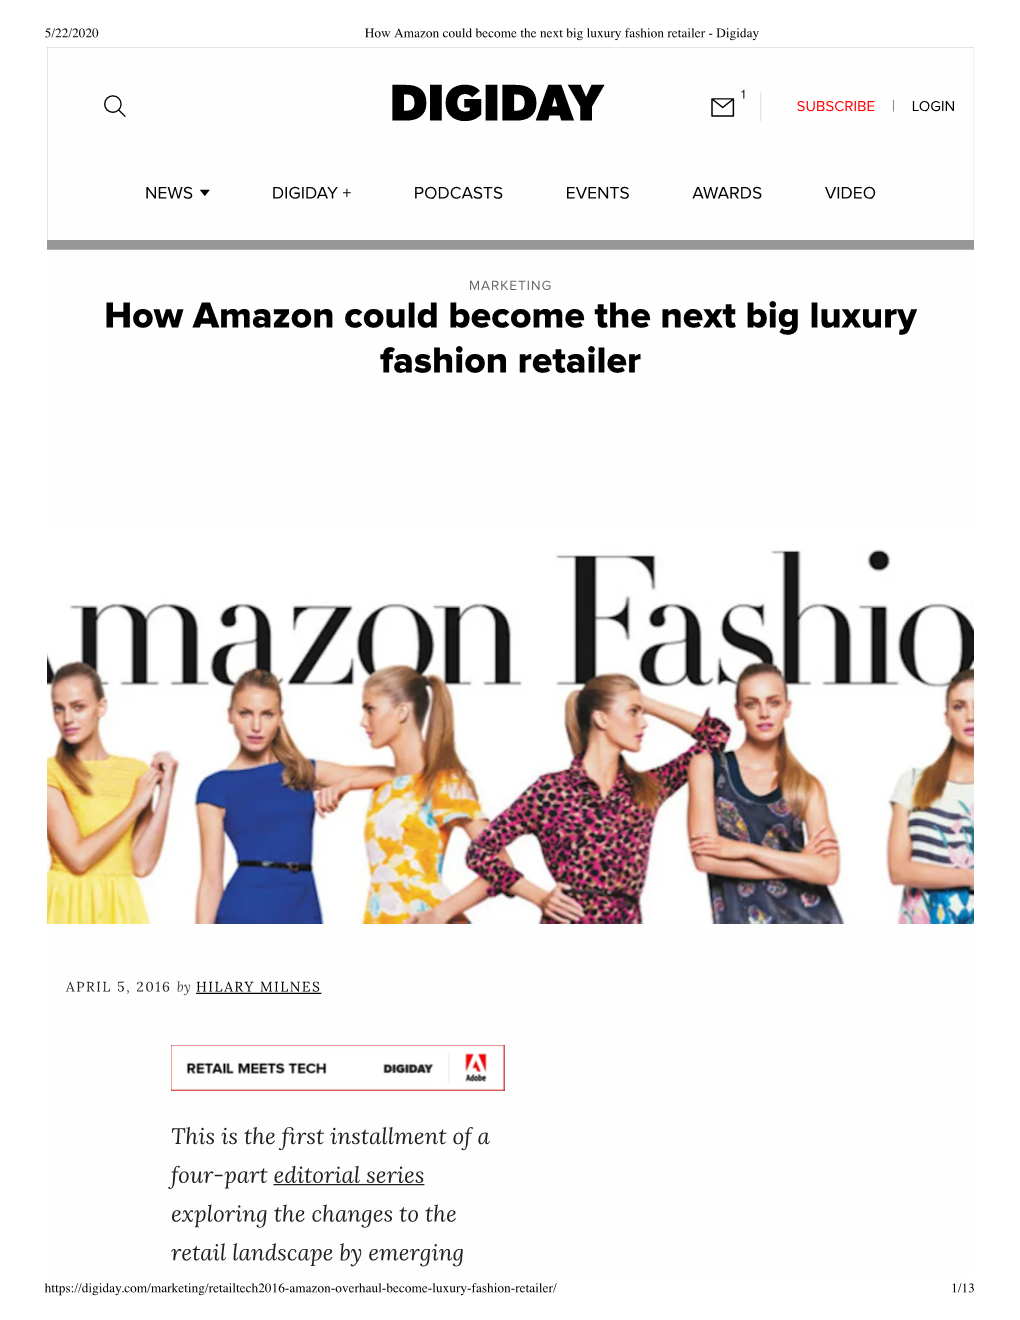 How Amazon Could Become the Next Big Luxury Fashion Retailer - Digiday